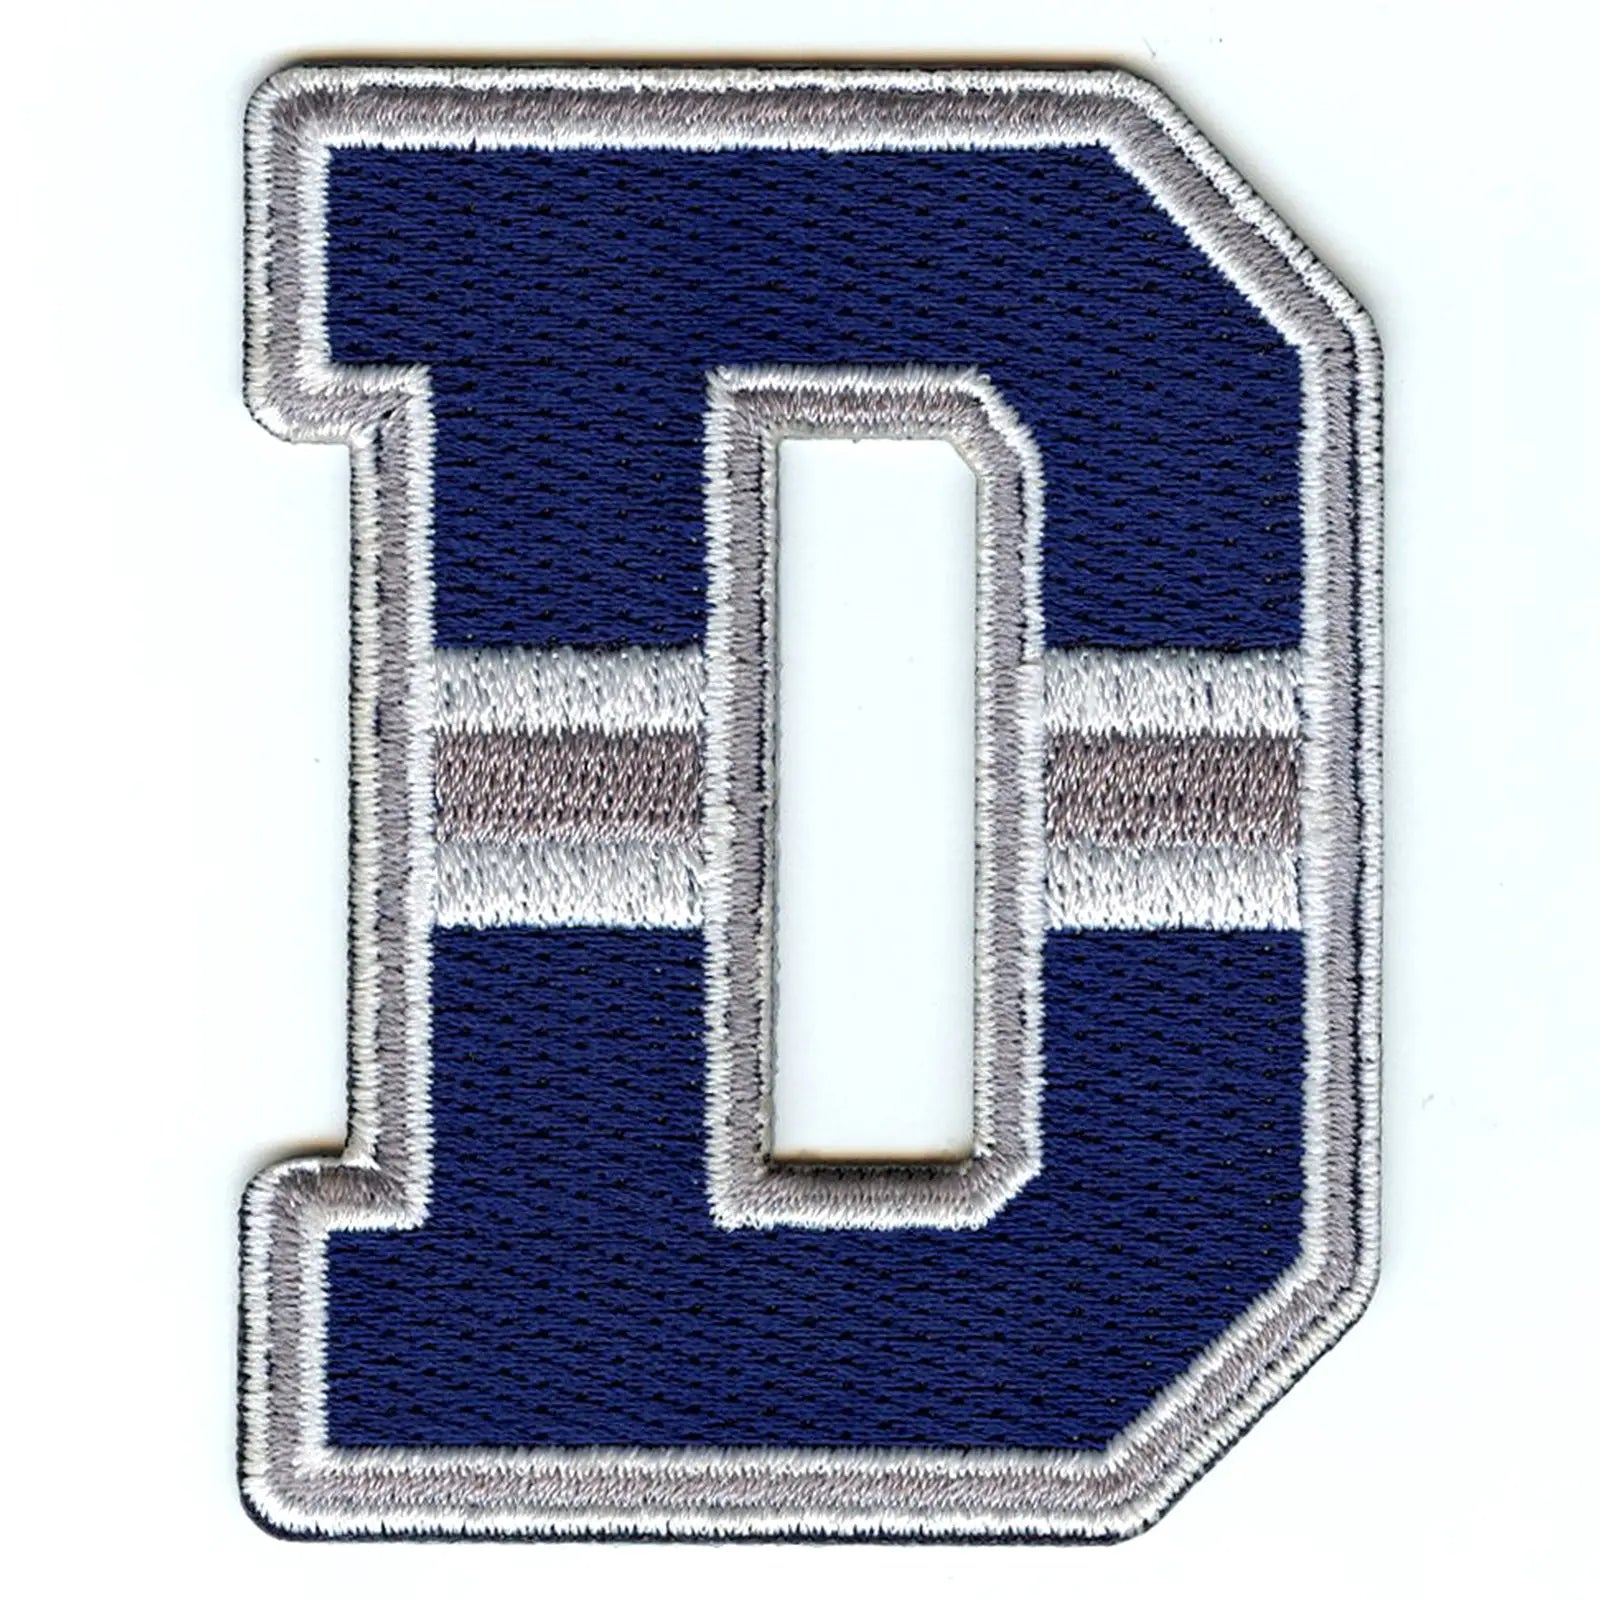 City of Dallas D Logo Football Jersey Parody Embroidered Iron on Patch